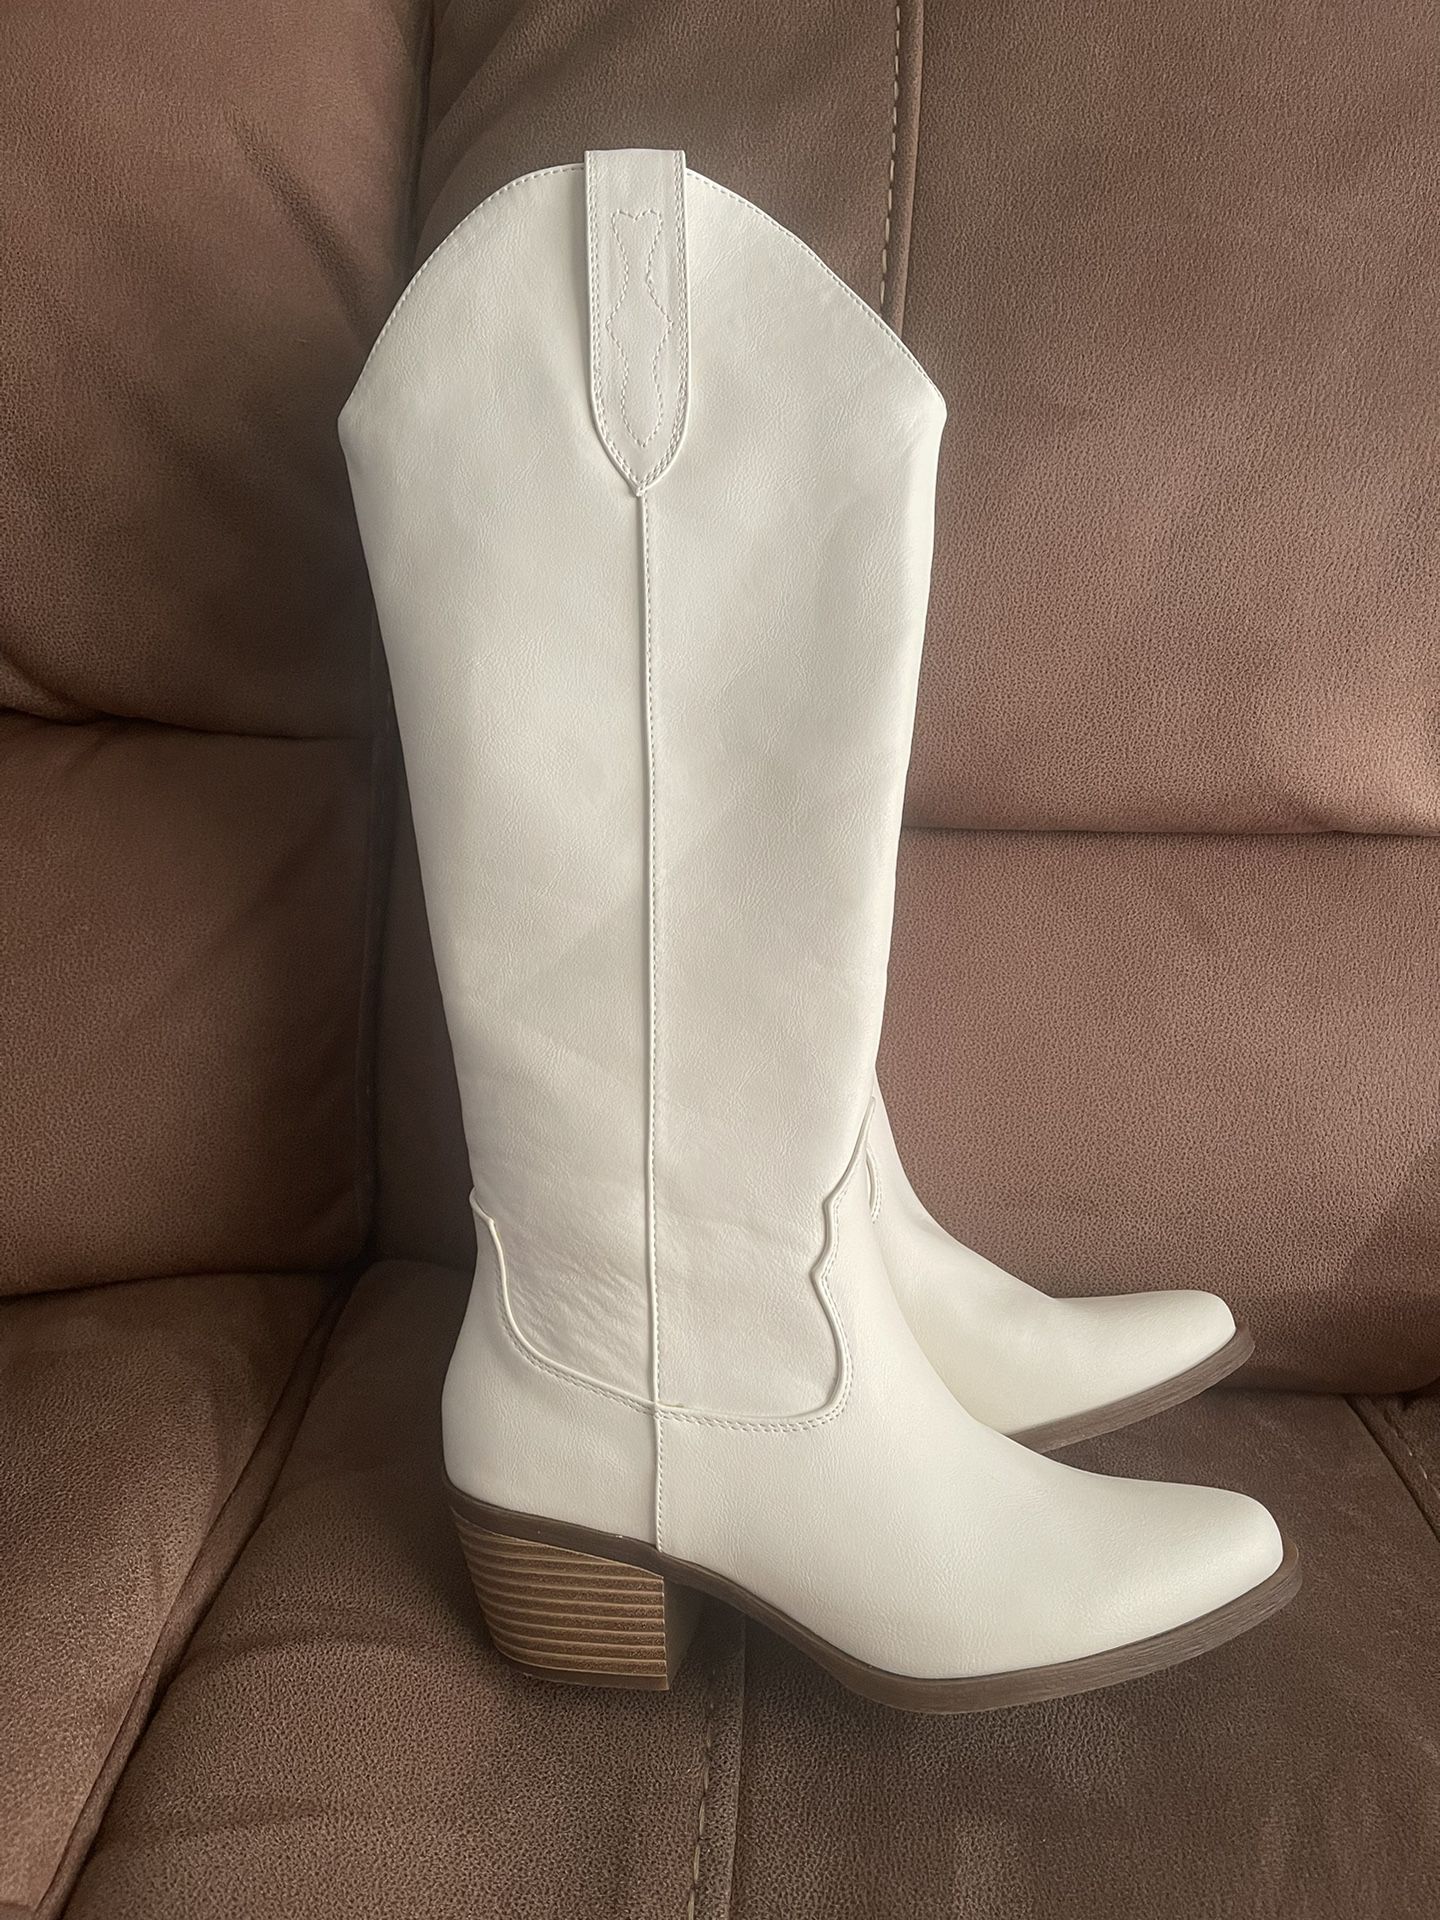 Willa Western Boots White Color Size 7.